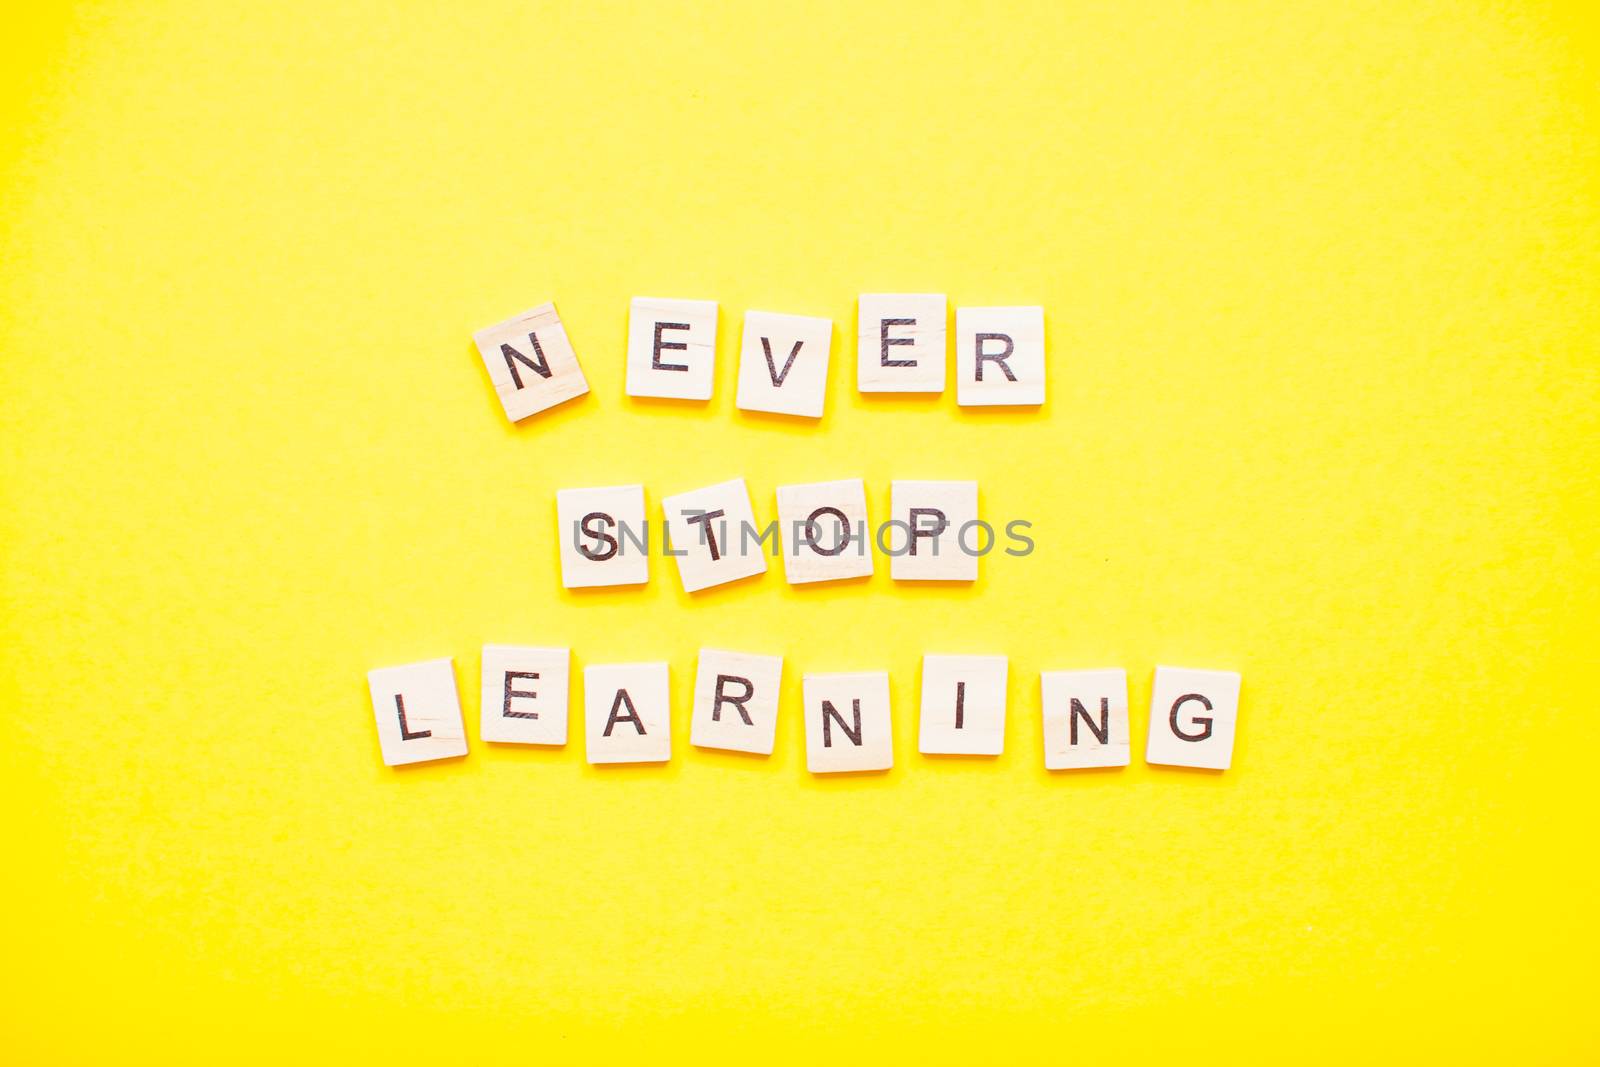 Words from wooden blocks "never stop learning" by malyshkamju